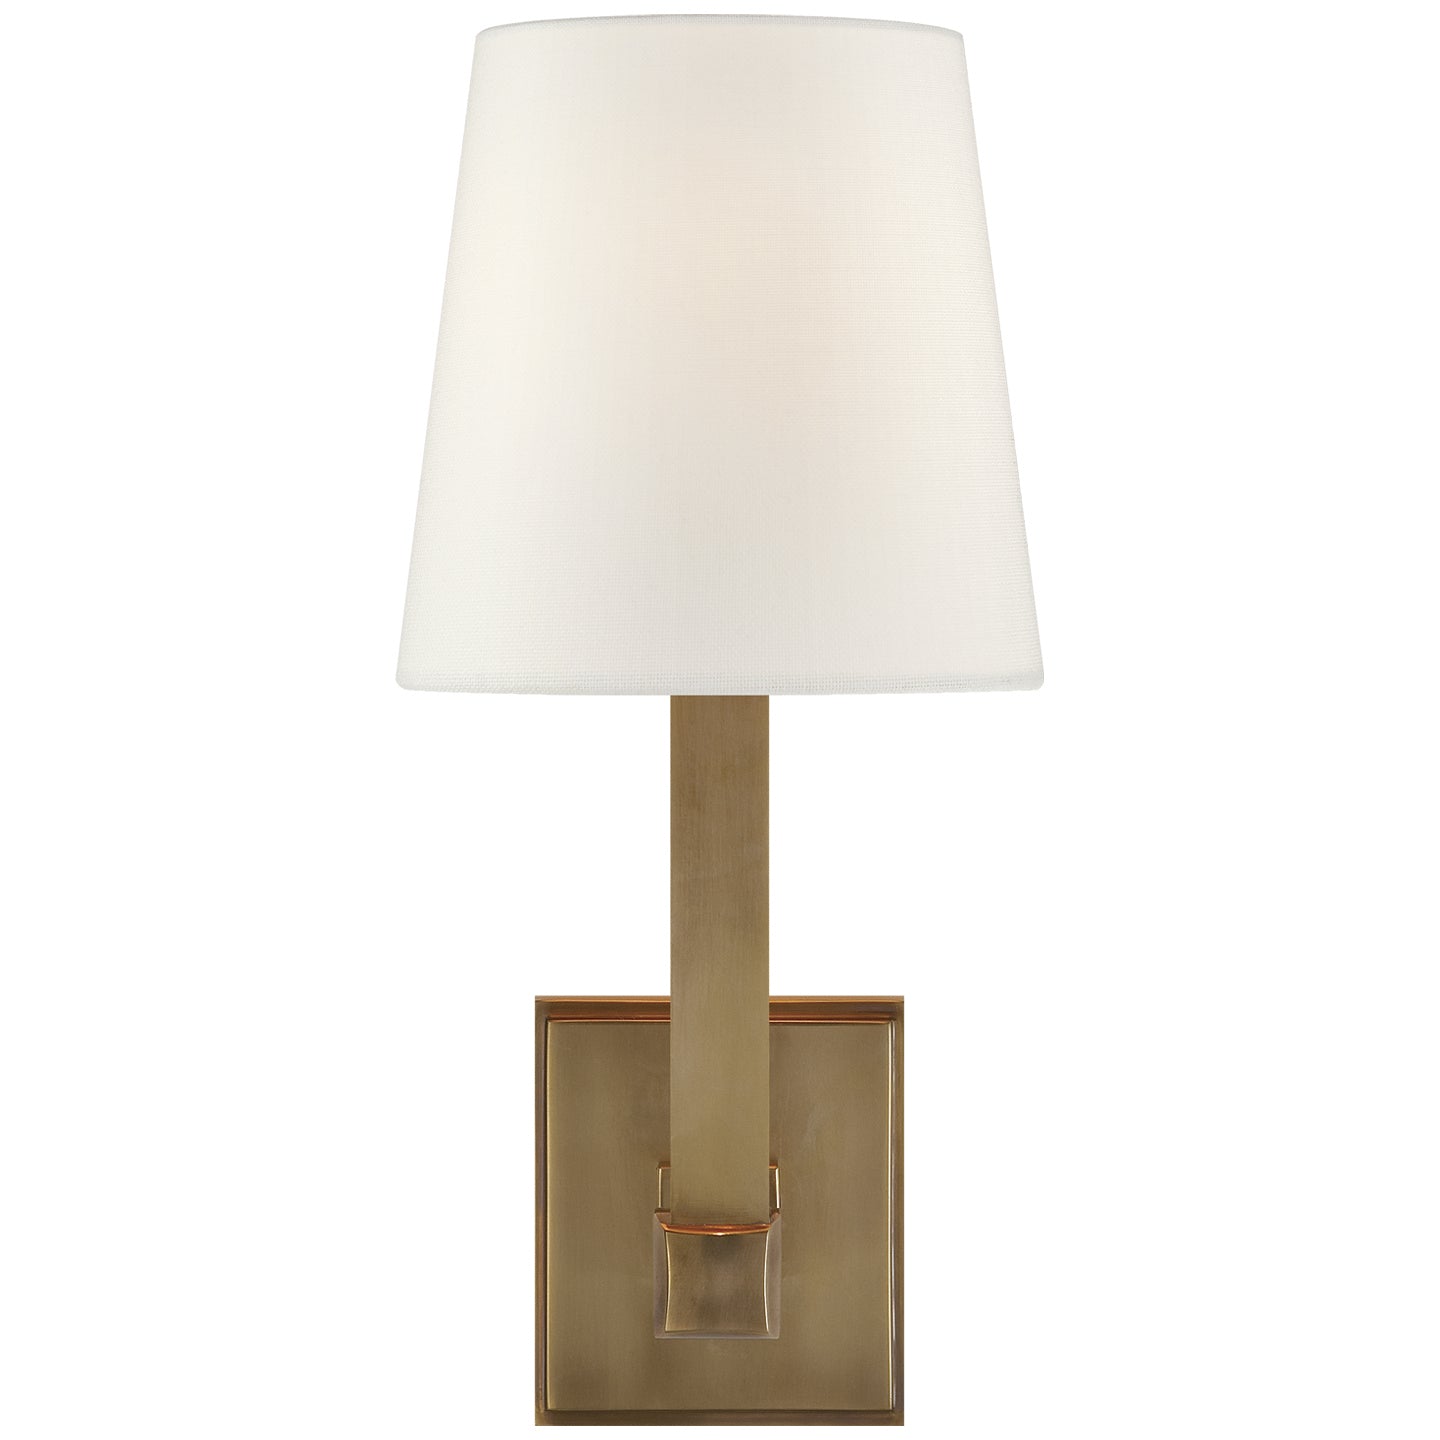 Visual Comfort Signature - SL 2819HAB-L - One Light Wall Sconce - Square Tube - Hand-Rubbed Antique Brass